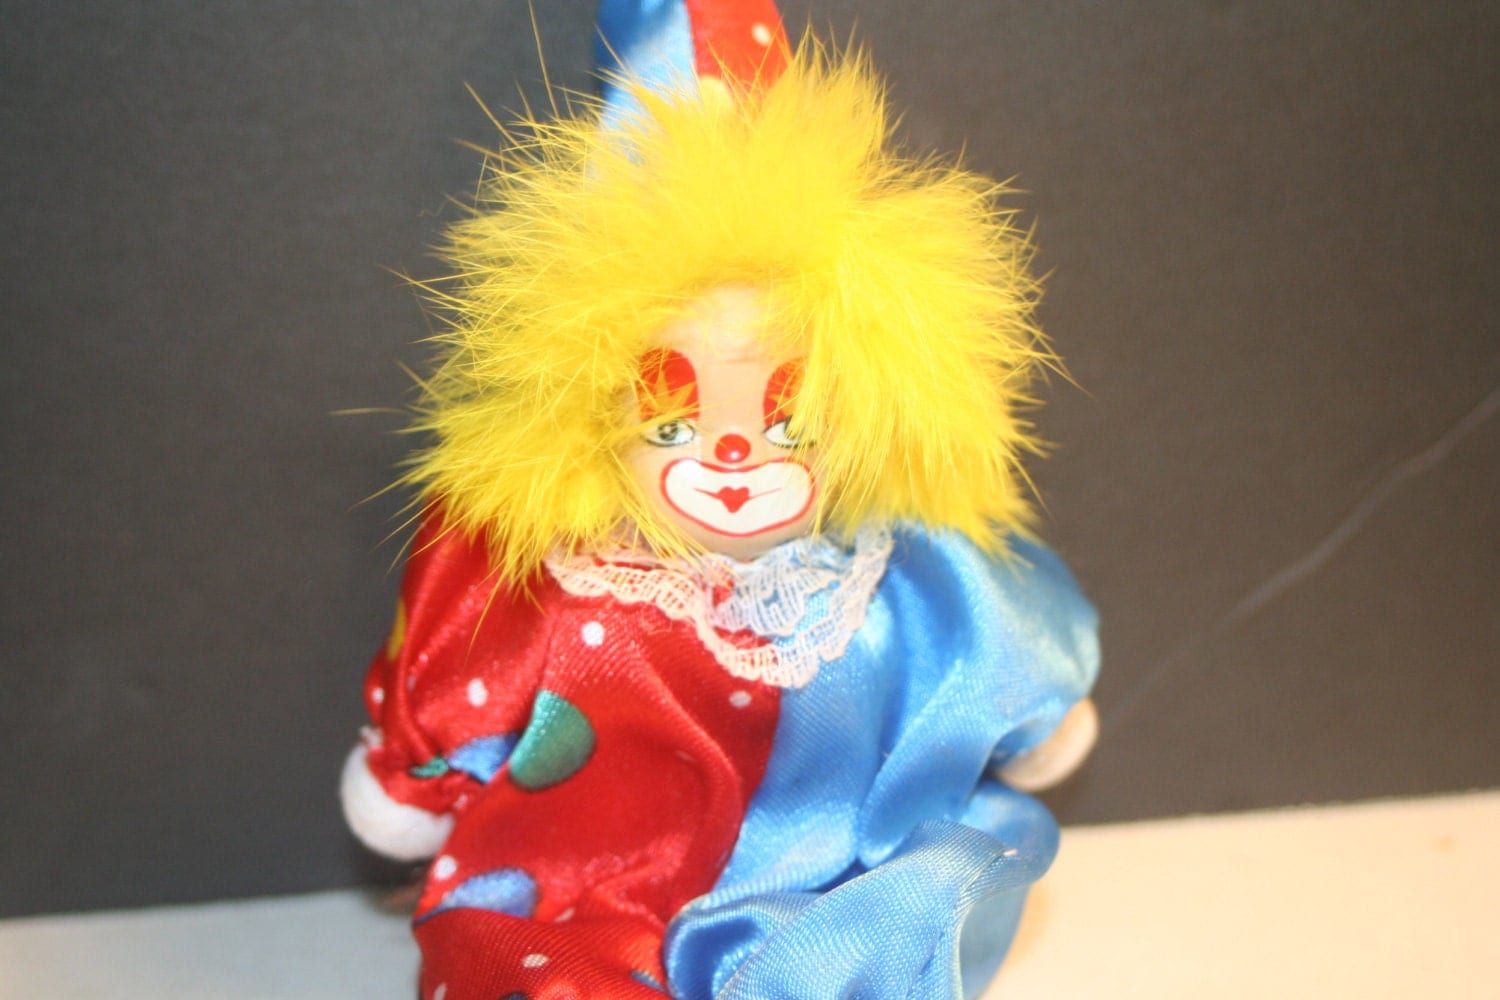 Small Vintage Porcelain Clown Doll Collectible by ...